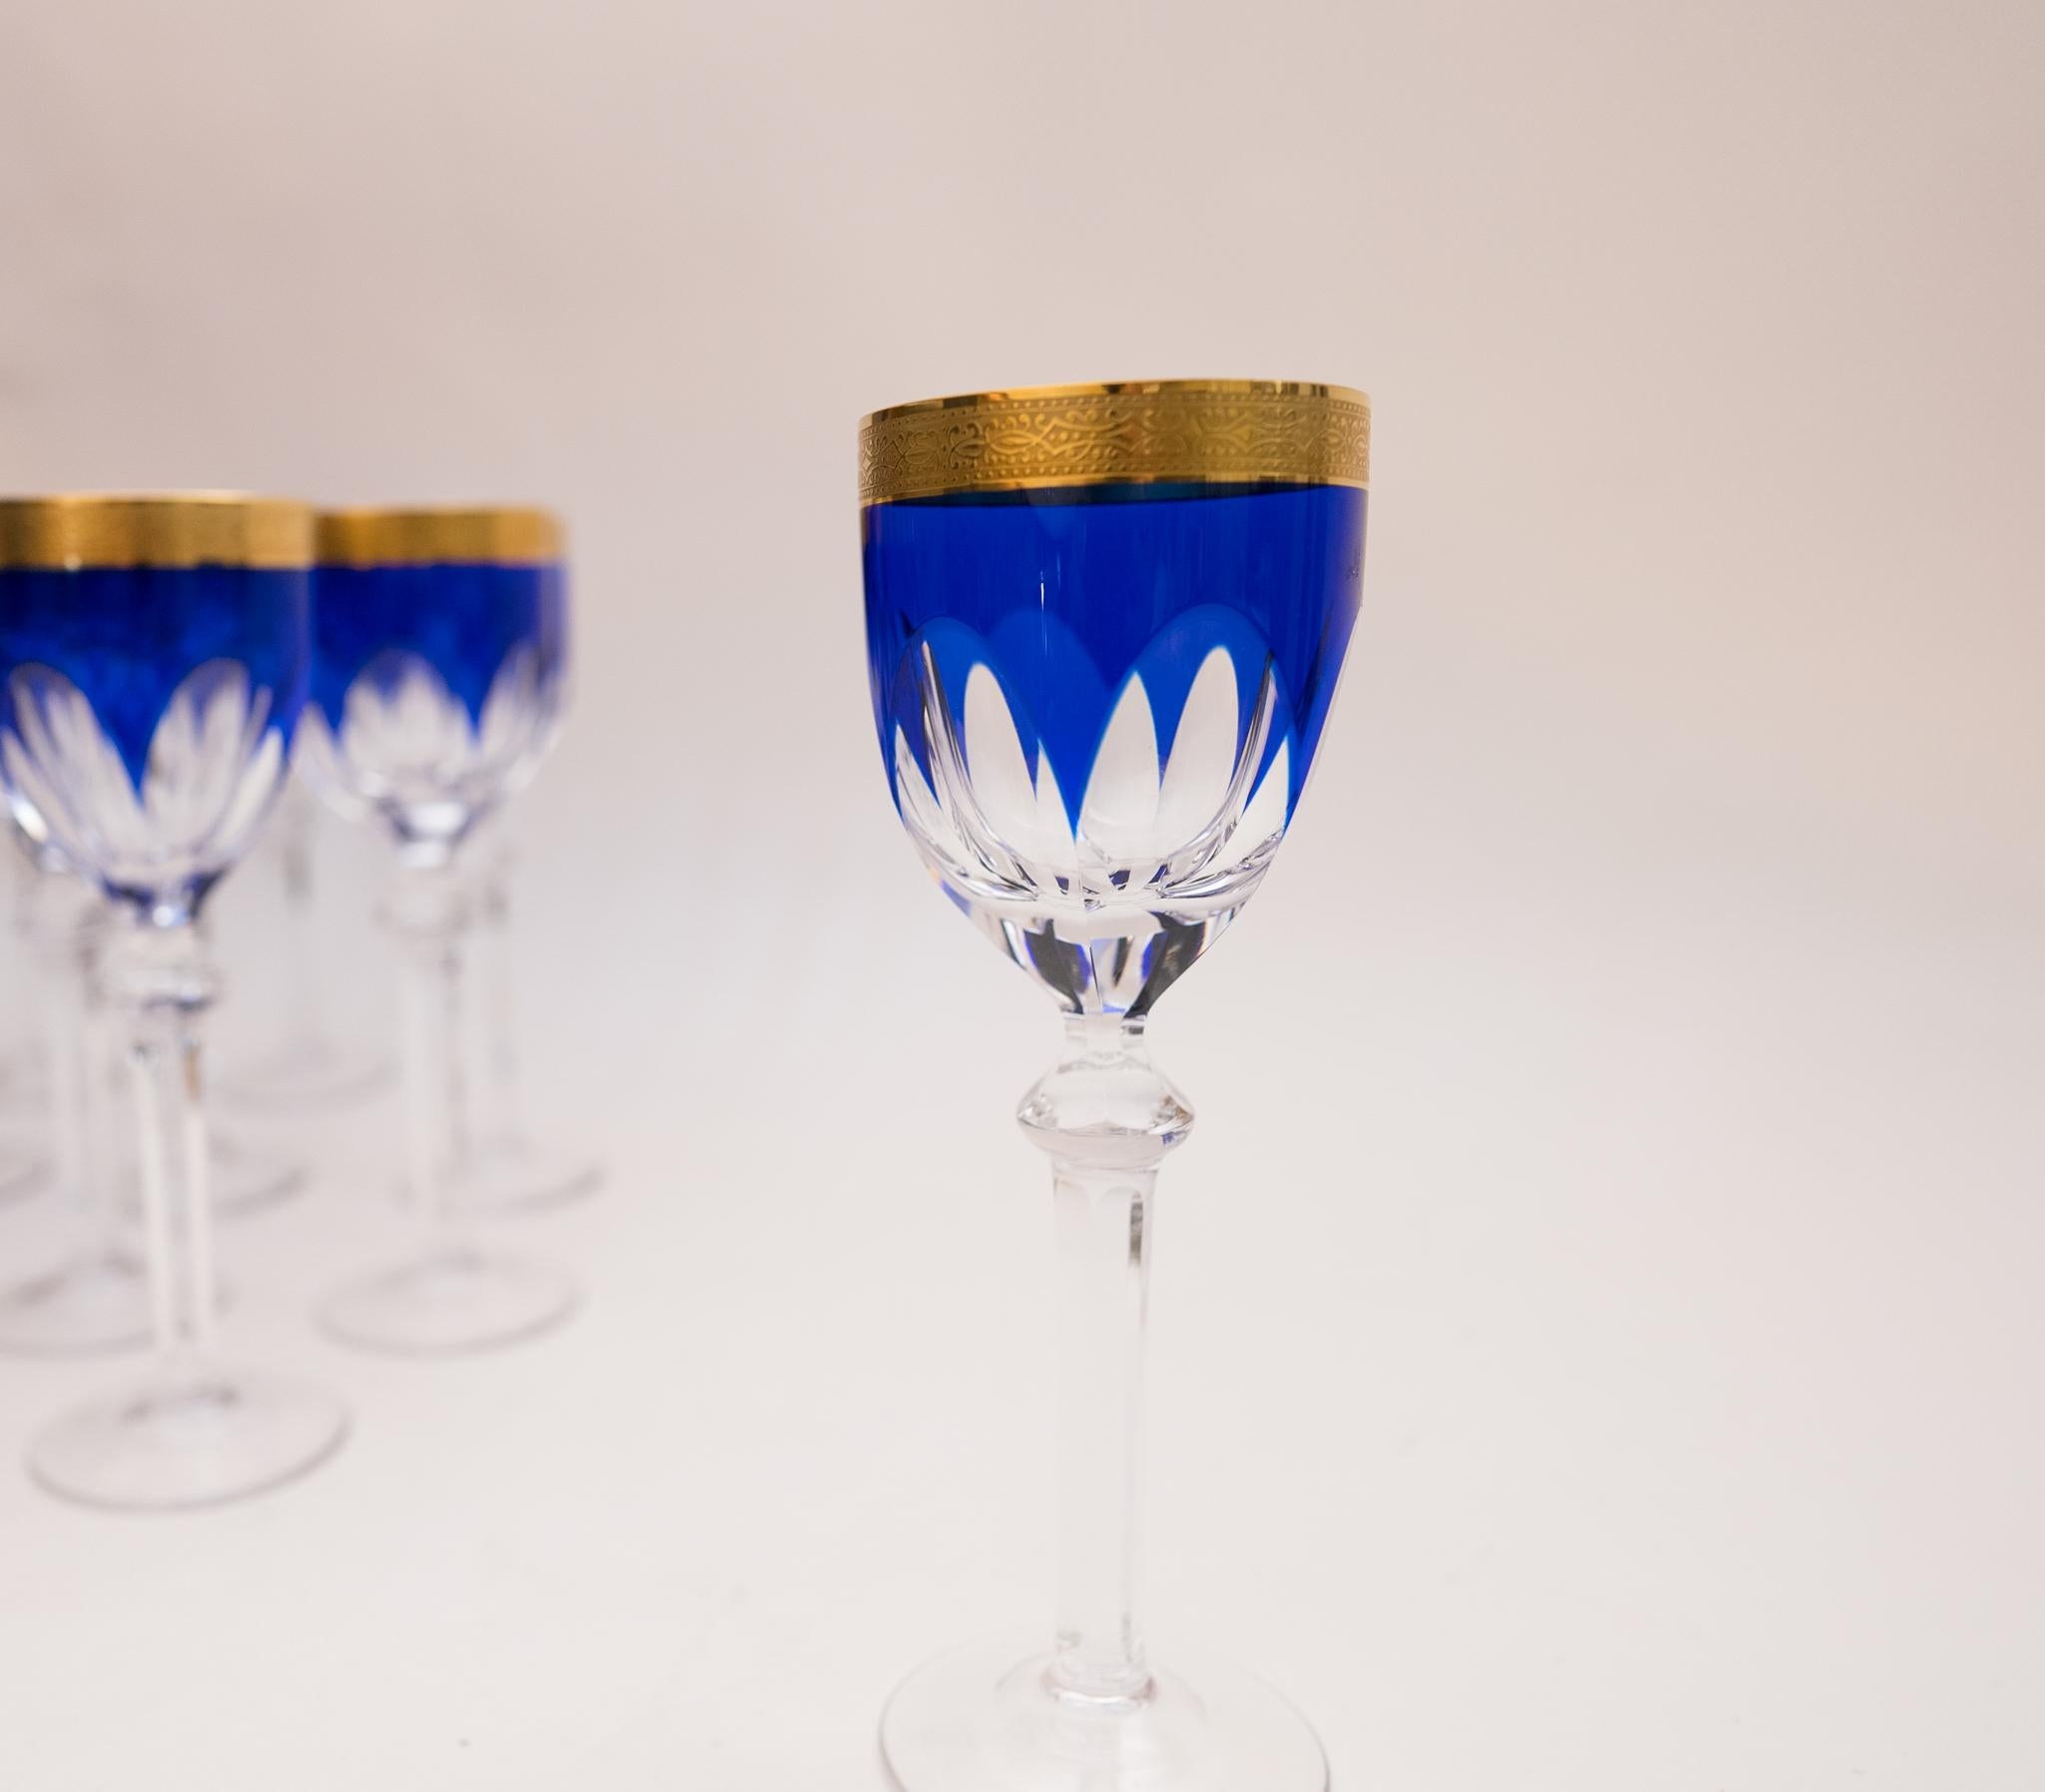 Scarce and hard to find matching set of 18 antique cobalt blue and gold cased crystal goblets. This set has a nice crisp cased and cut to clear cobalt blue bowl with a cut knob stem as well. The 24 karat gold band measures an half inch and it is